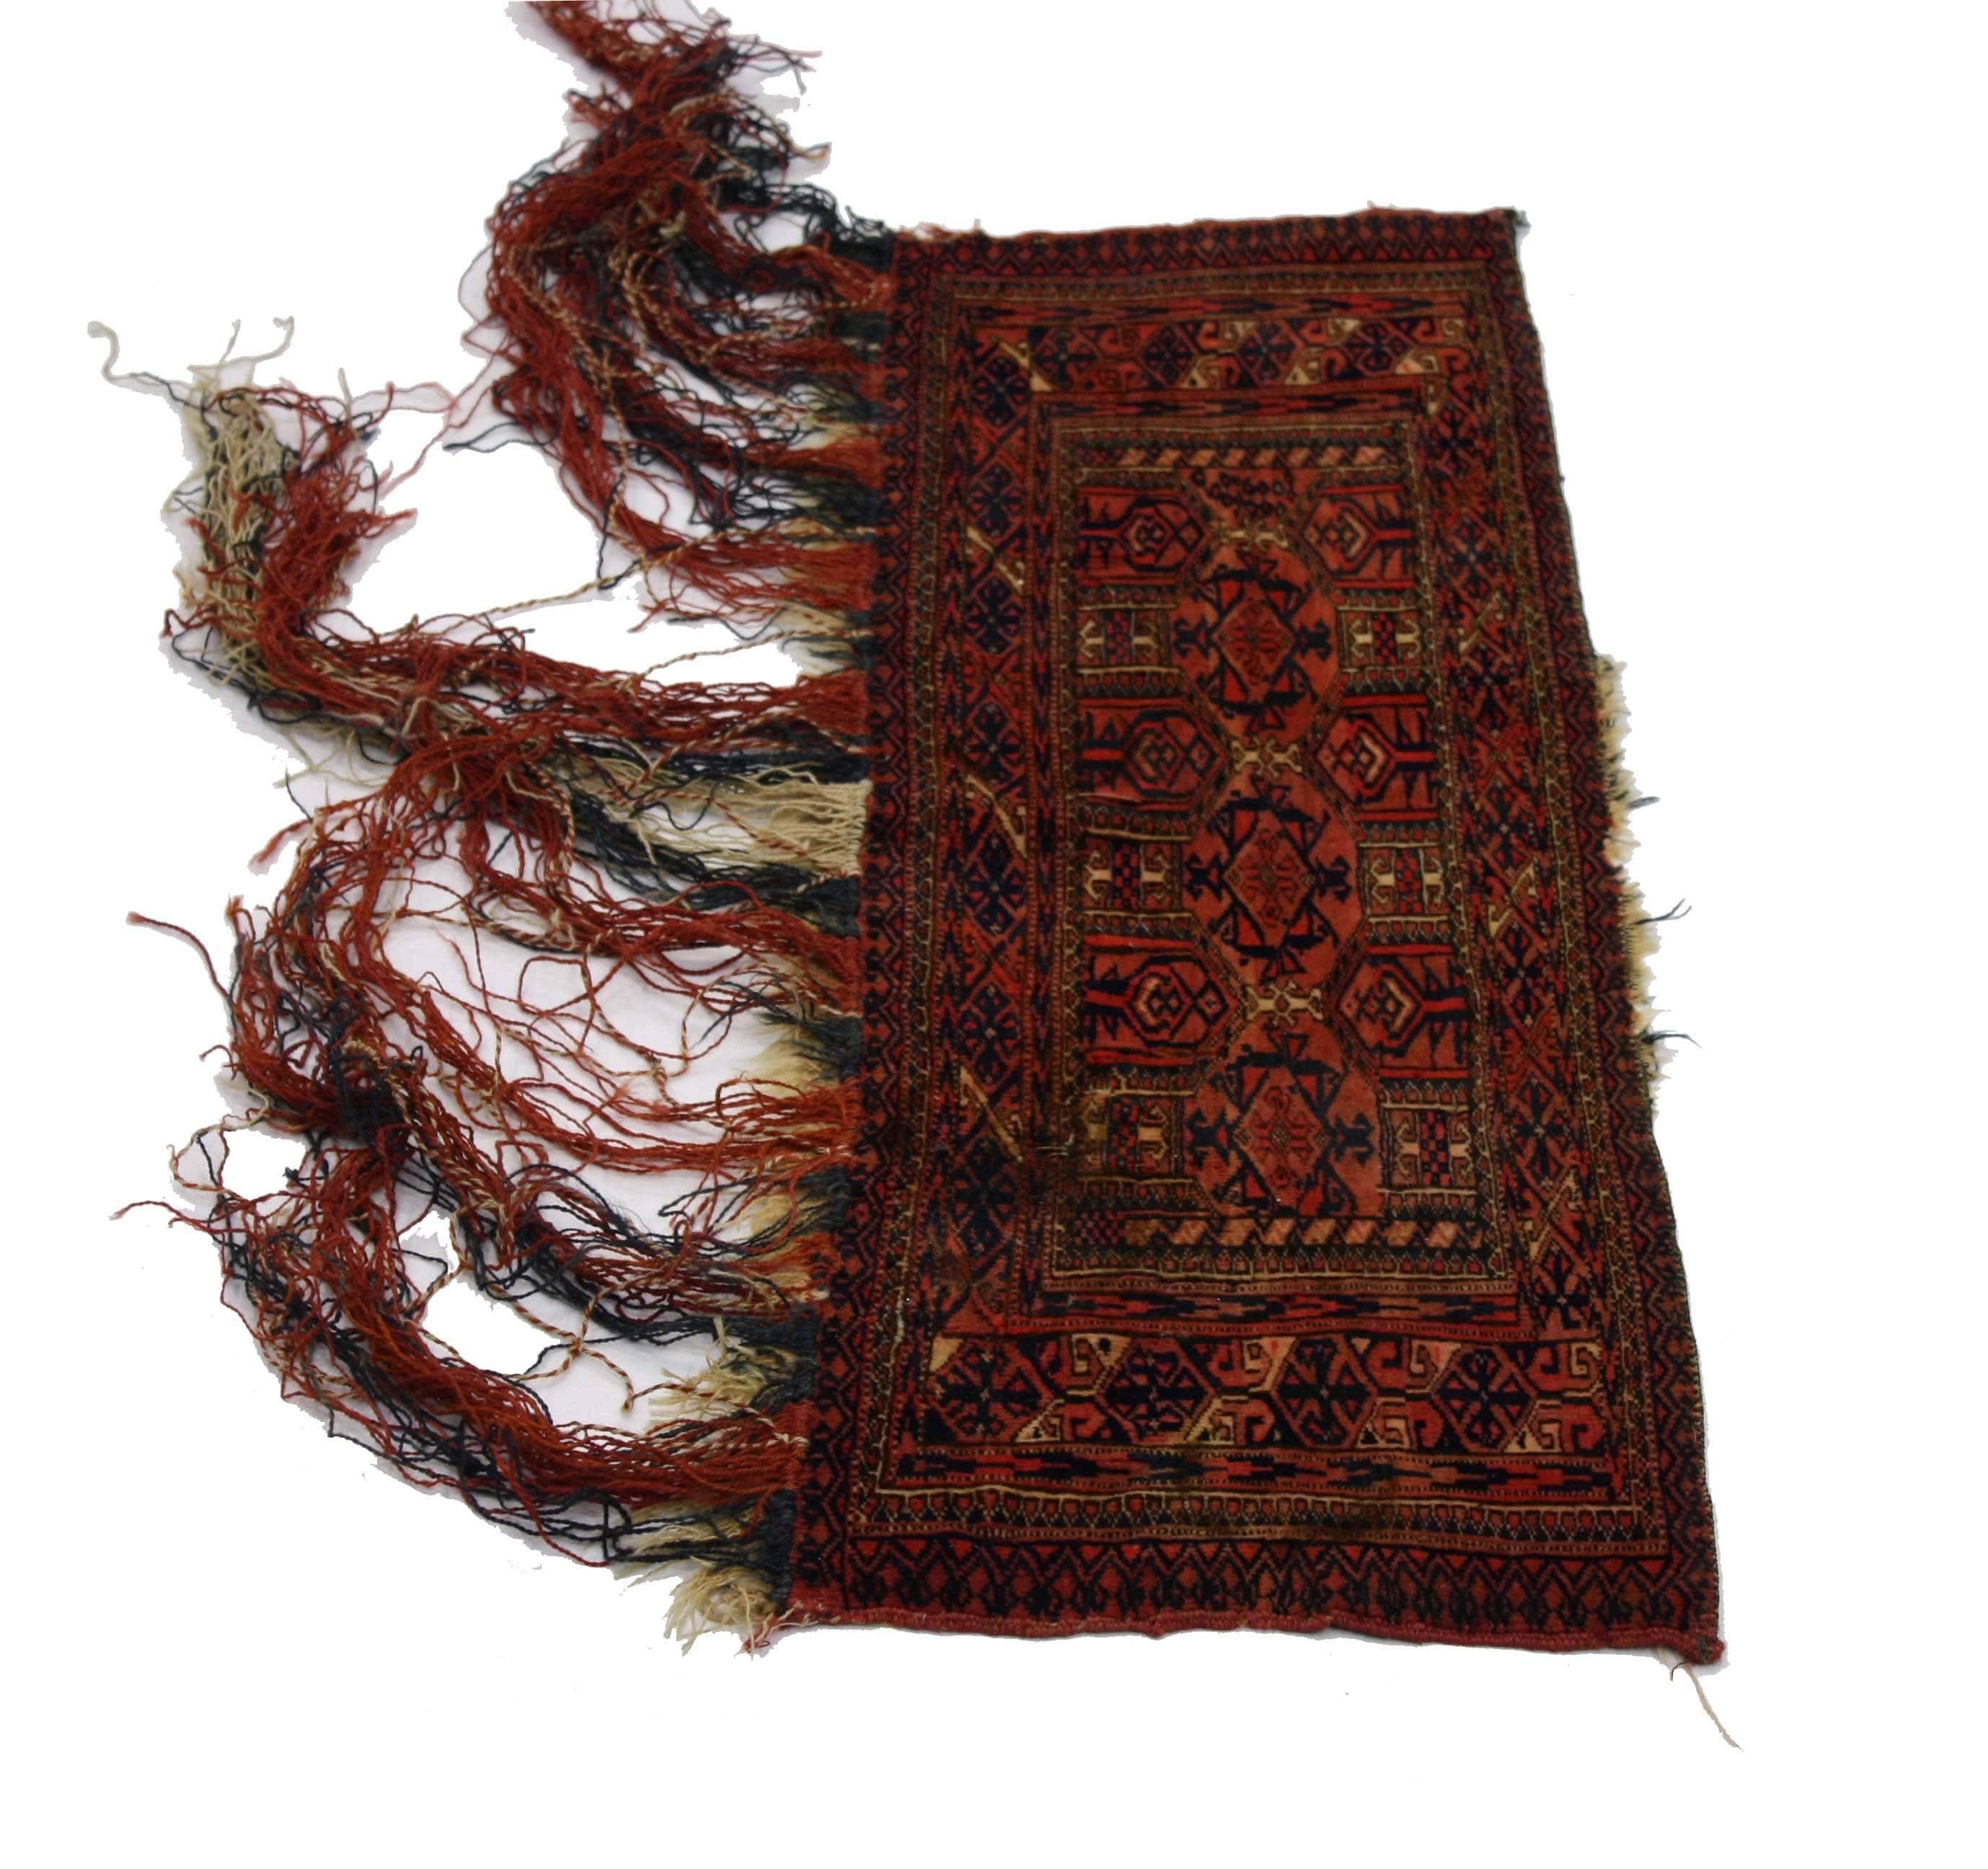 Hand-Knotted Antique Afghan Turkoman Turkmen Torba Bag, Wall Hanging, Tribal Textile Tapestry For Sale